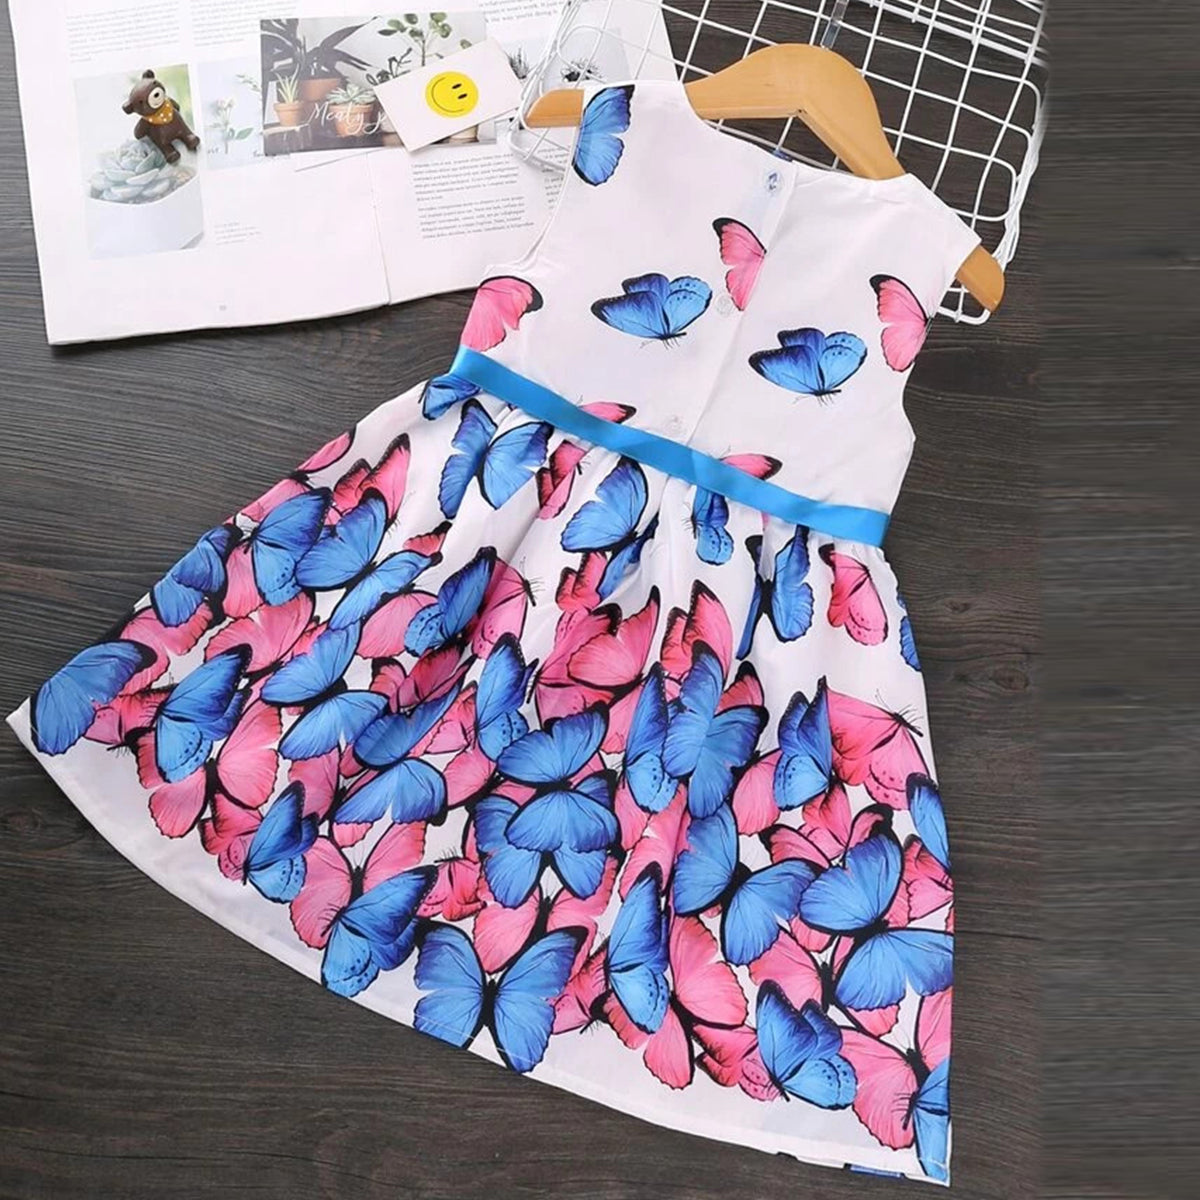 Custom Made Butterfly Tutu Communion Dress With Train With Jewel Neckline,  Backless Design, Sweep Train, And Petticoat Perfect For Christmas And  Special Occasions From Dressvip, $100.06 | DHgate.Com